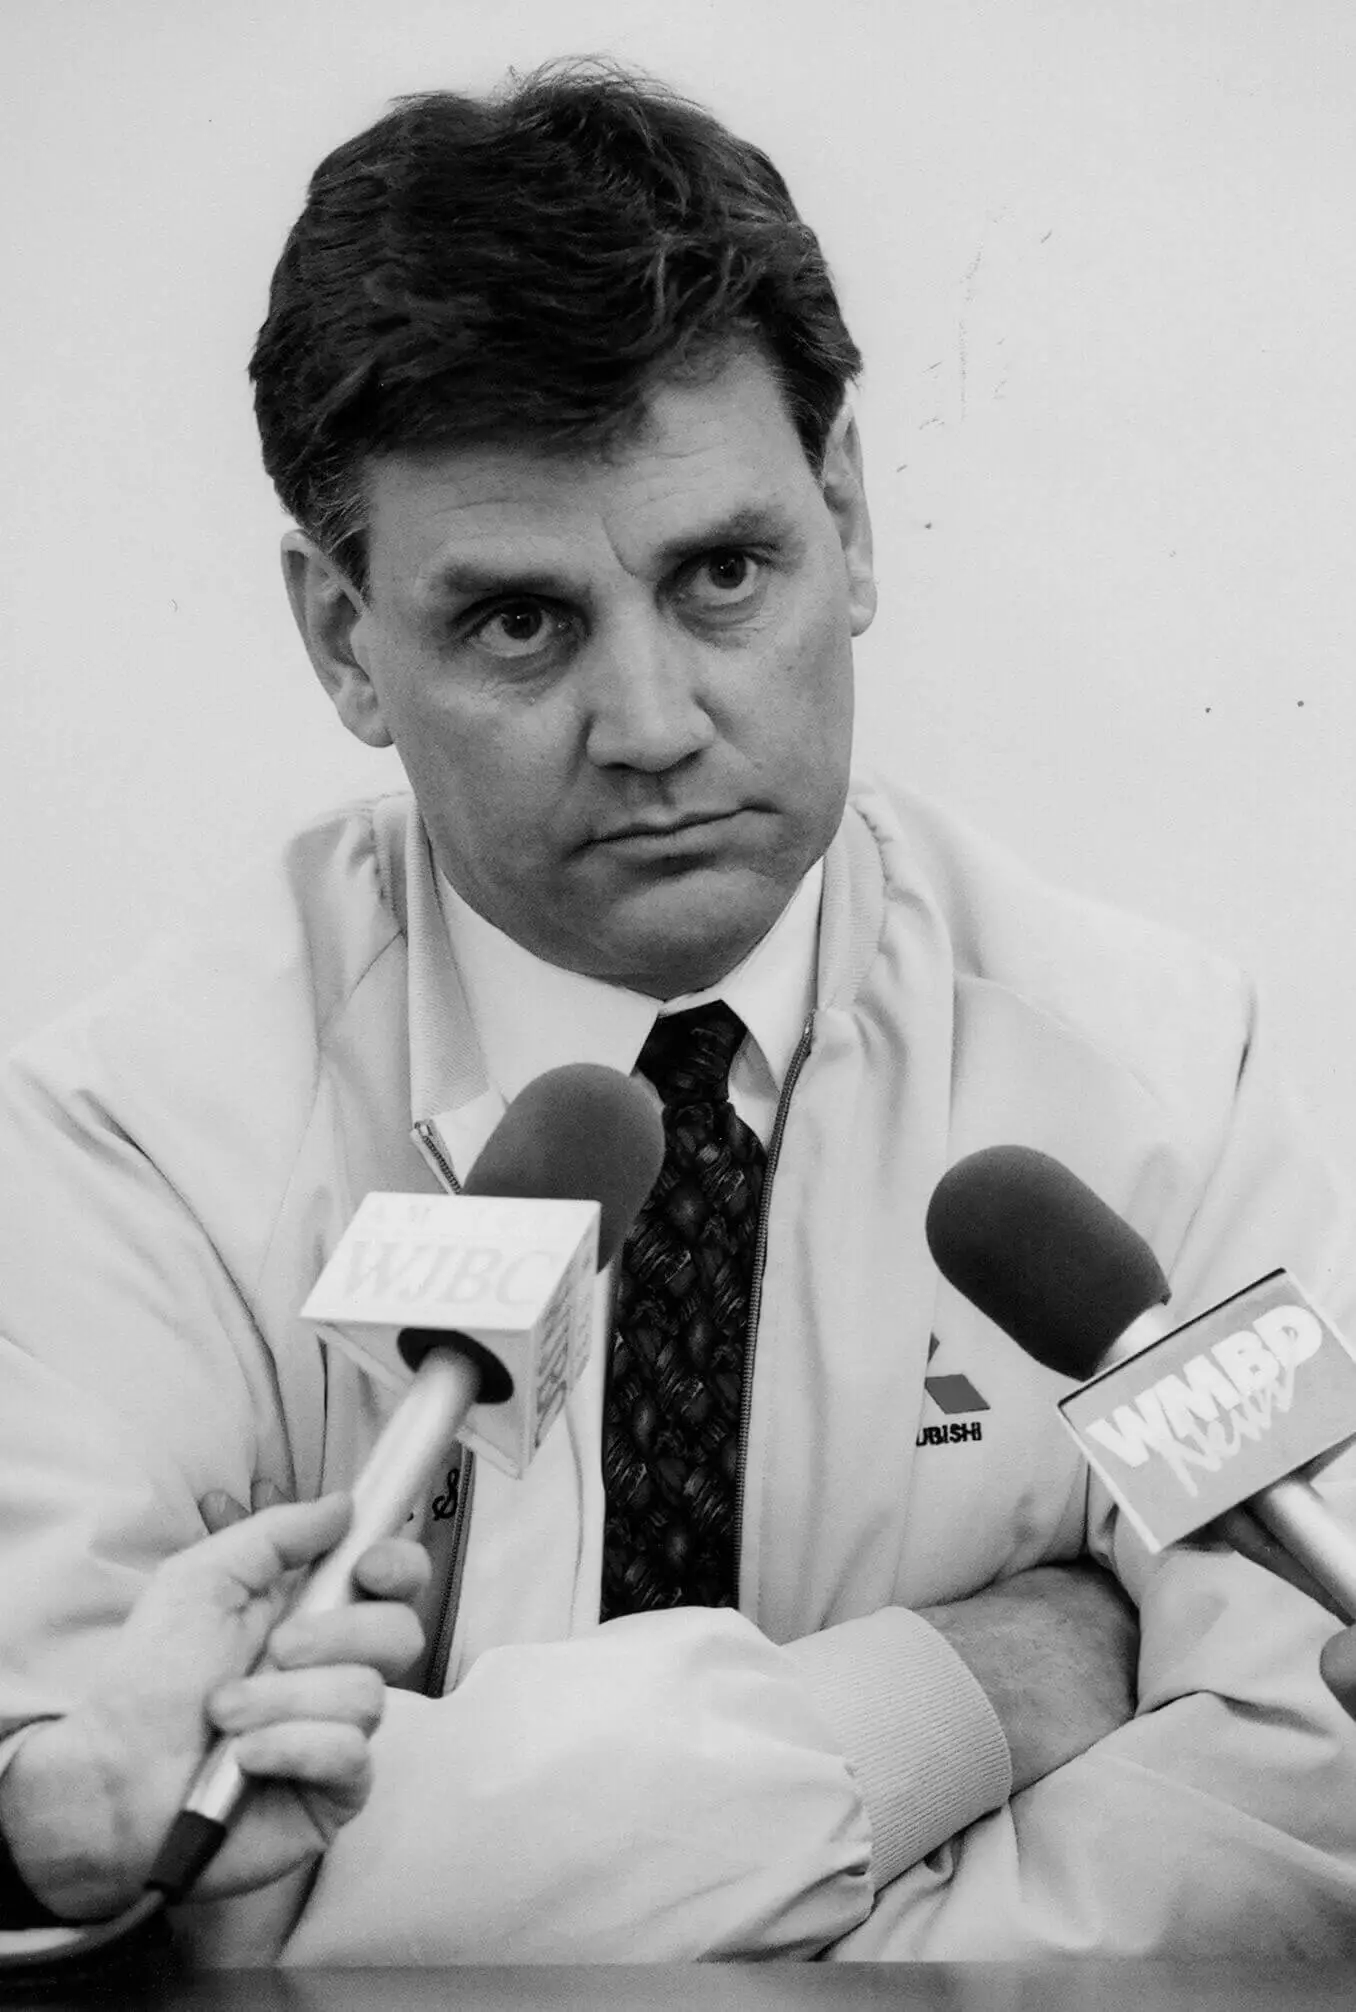 White man with two microphones held up to him. He looks unhappy. He is wearing a mitusbishi zip-up jacket, white shirt and tie. He has dark short hair.